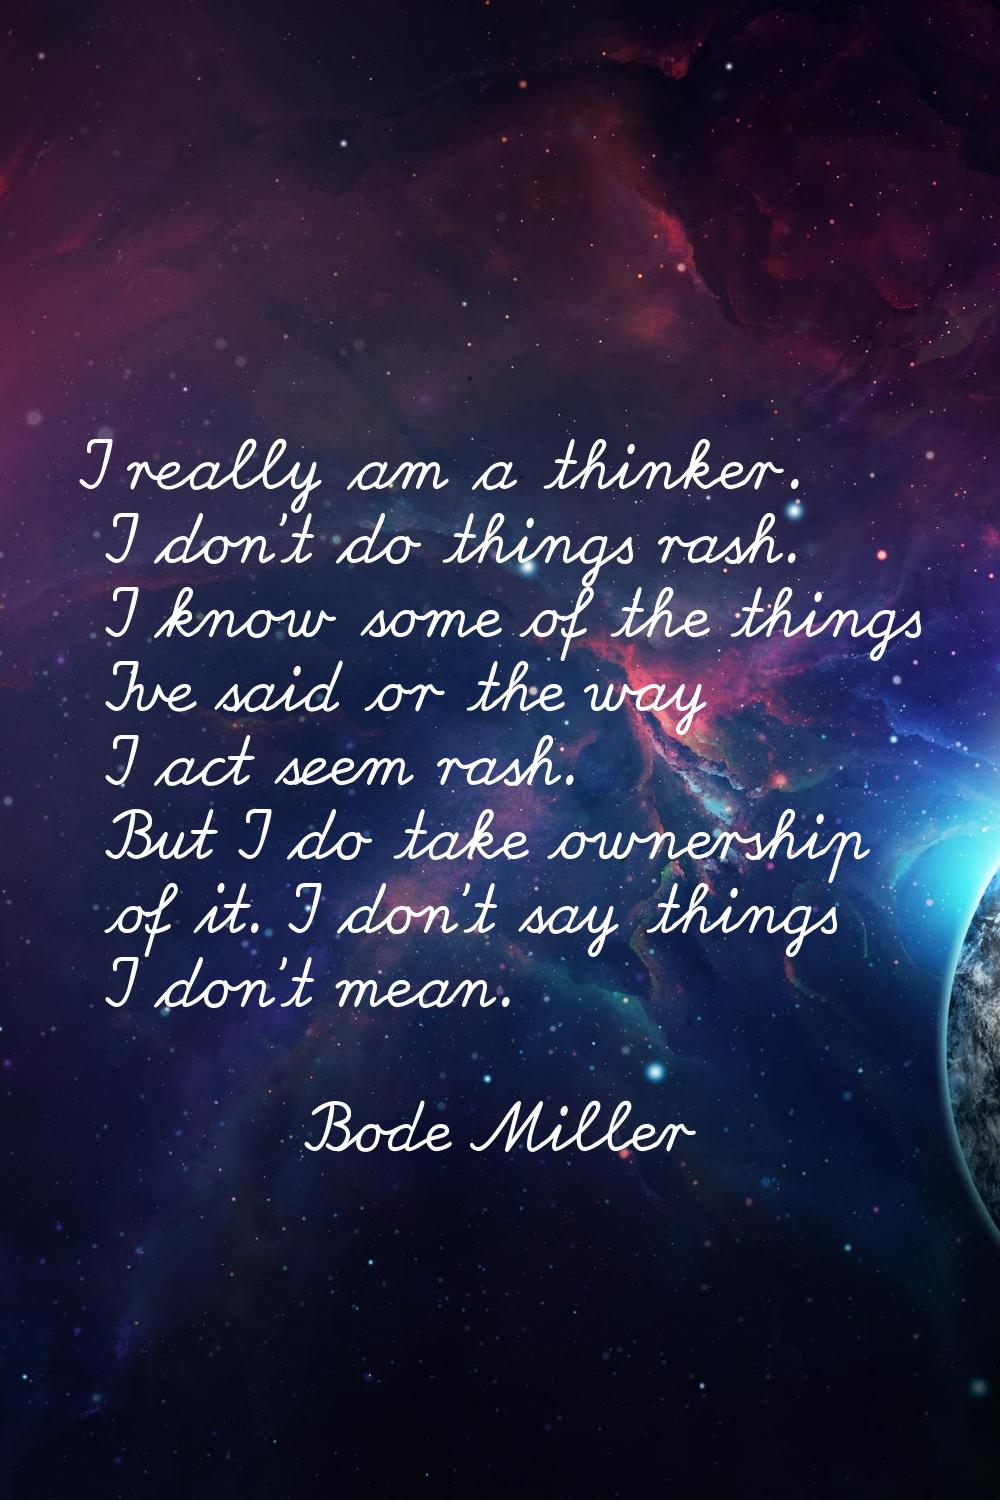 I really am a thinker. I don't do things rash. I know some of the things I've said or the way I act